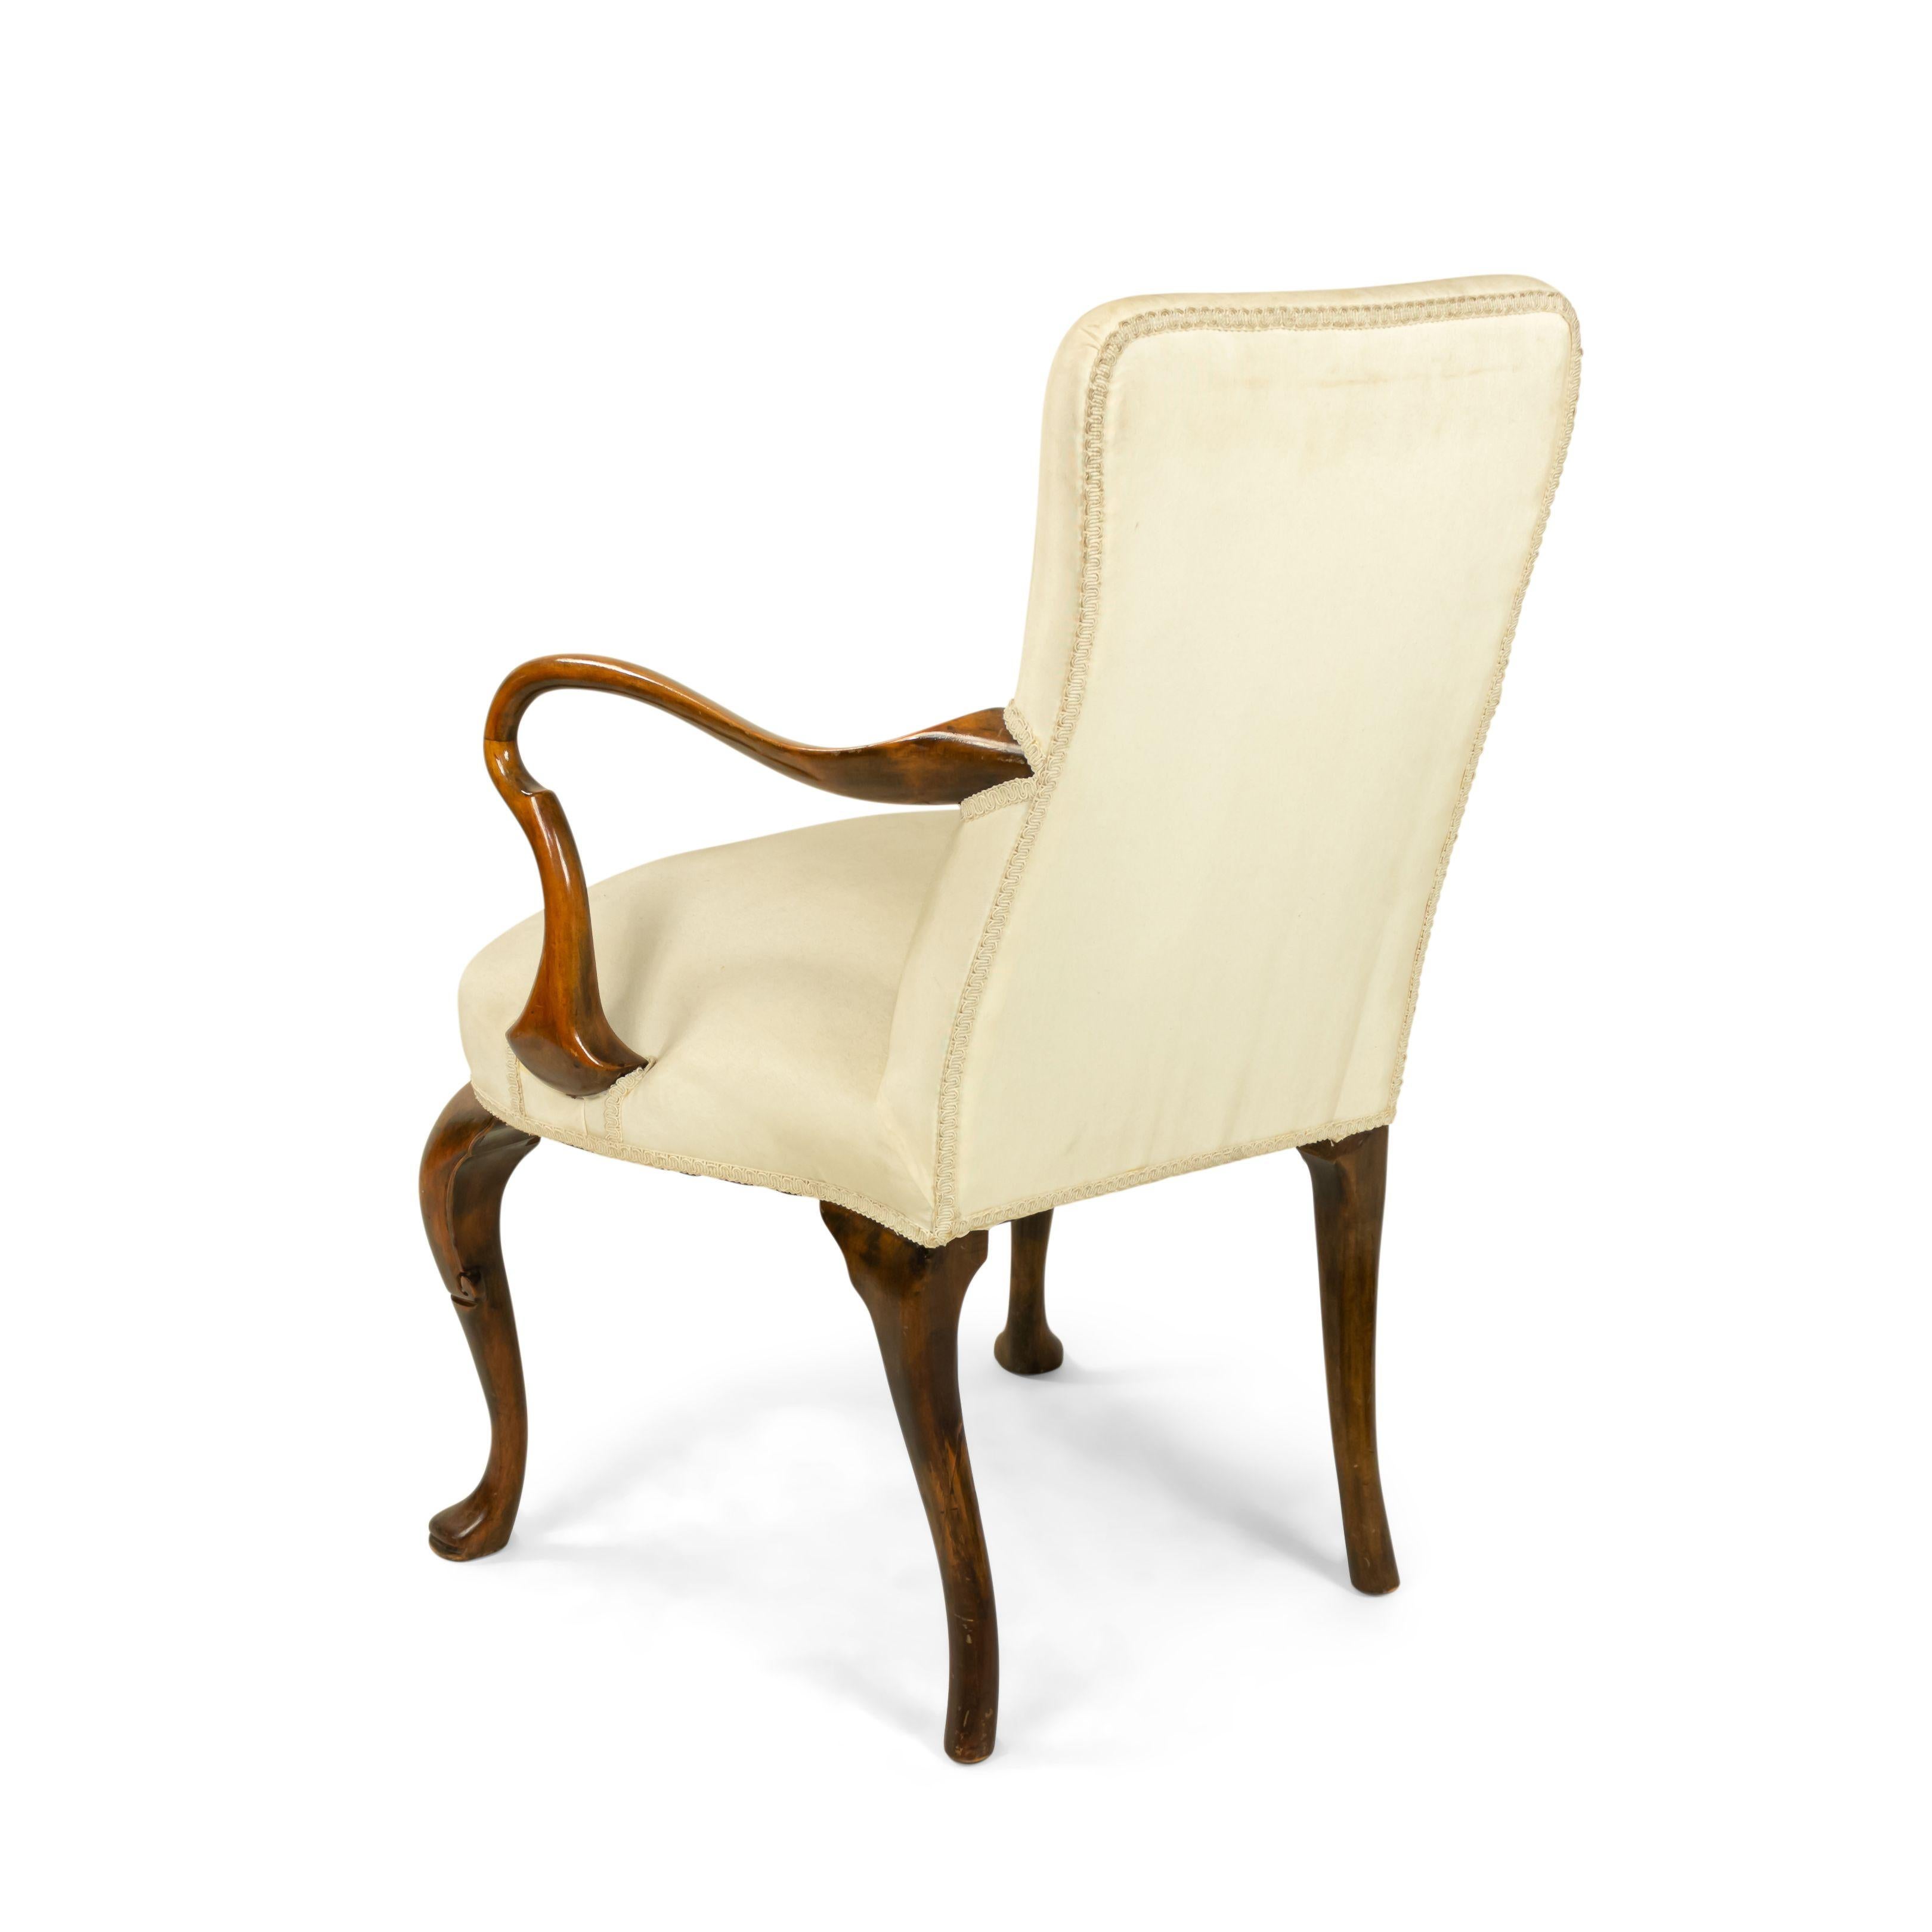 English Queen Anne White Upholstered Walnut Armchair For Sale